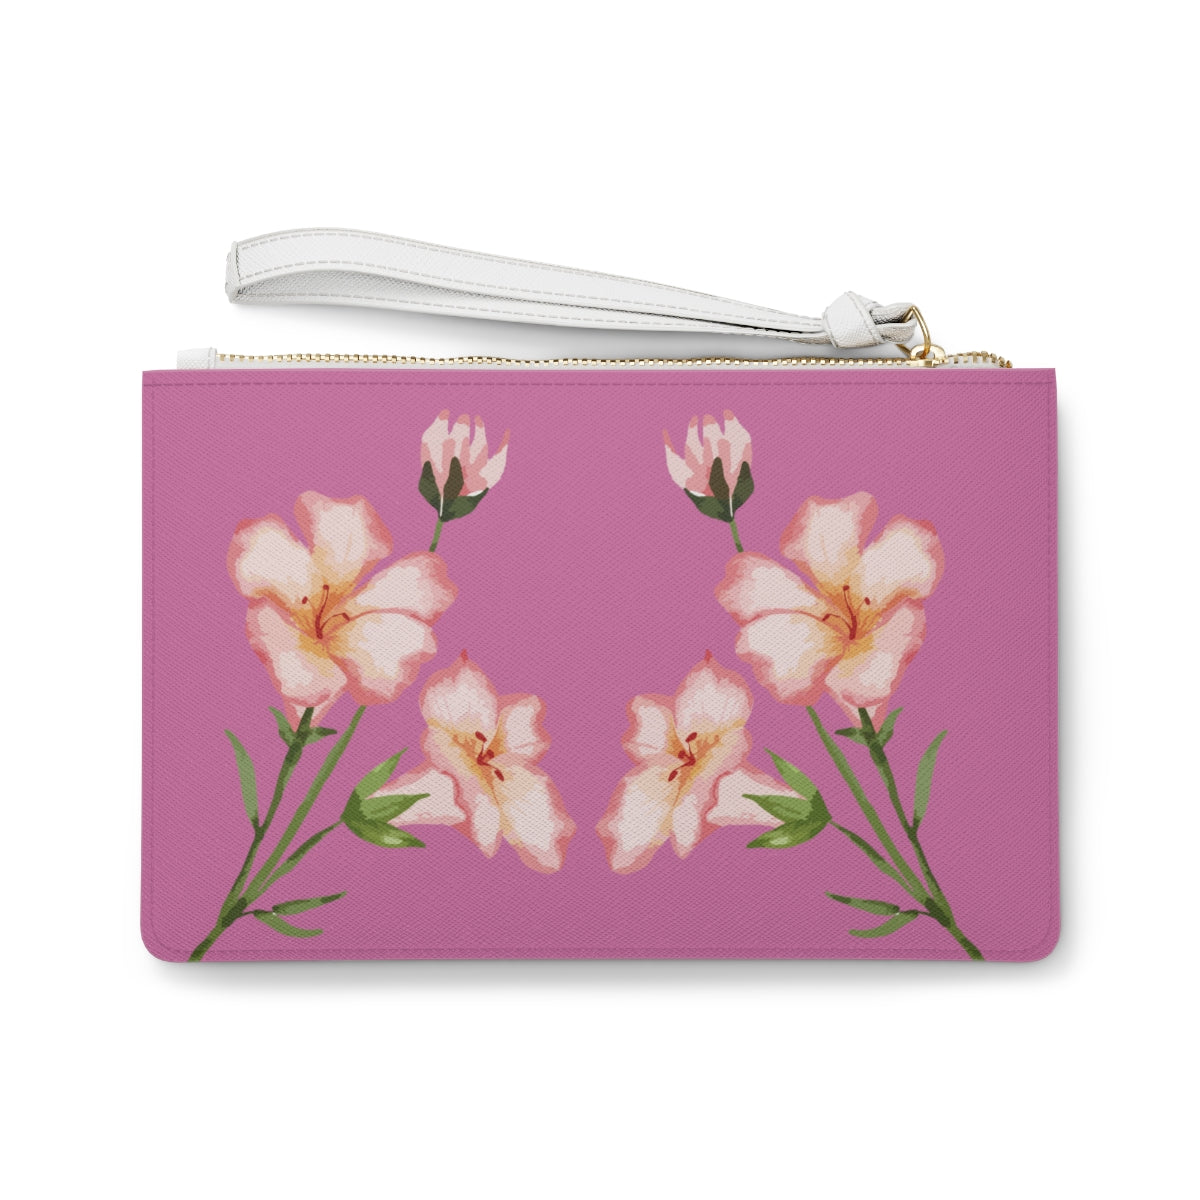 CLUTCH BAG FOR GIRLS, WOMEN, GIFT FOR HER,